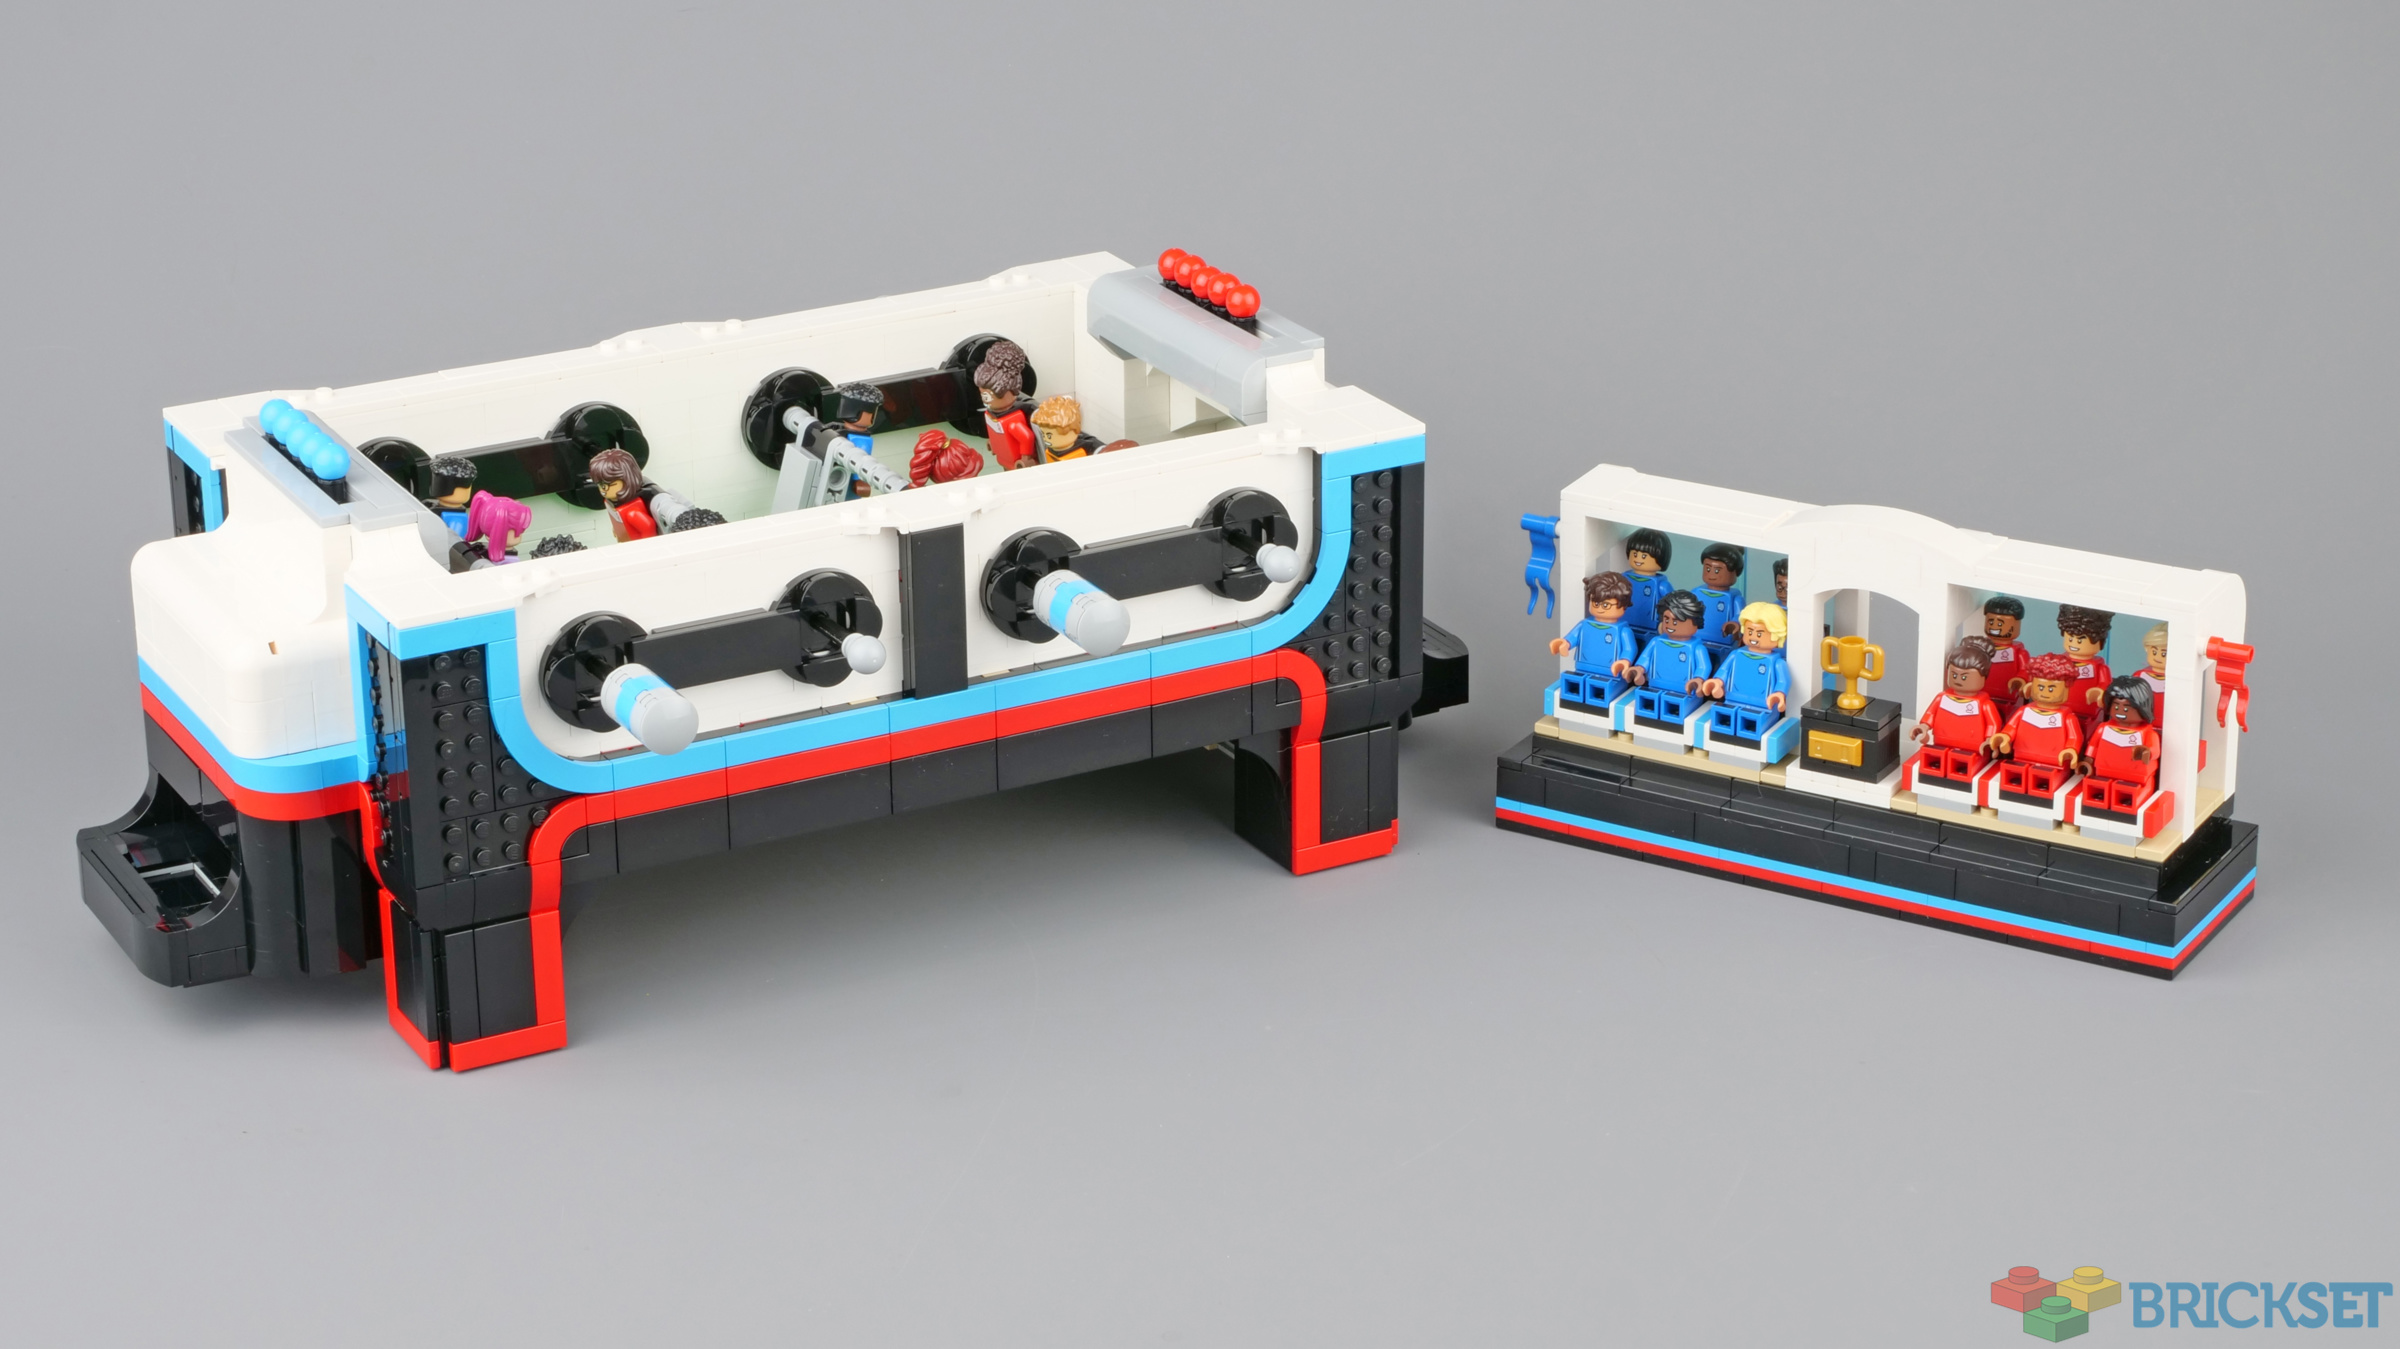 LEGO's latest set is a miniature 2,300-piece foosball game table